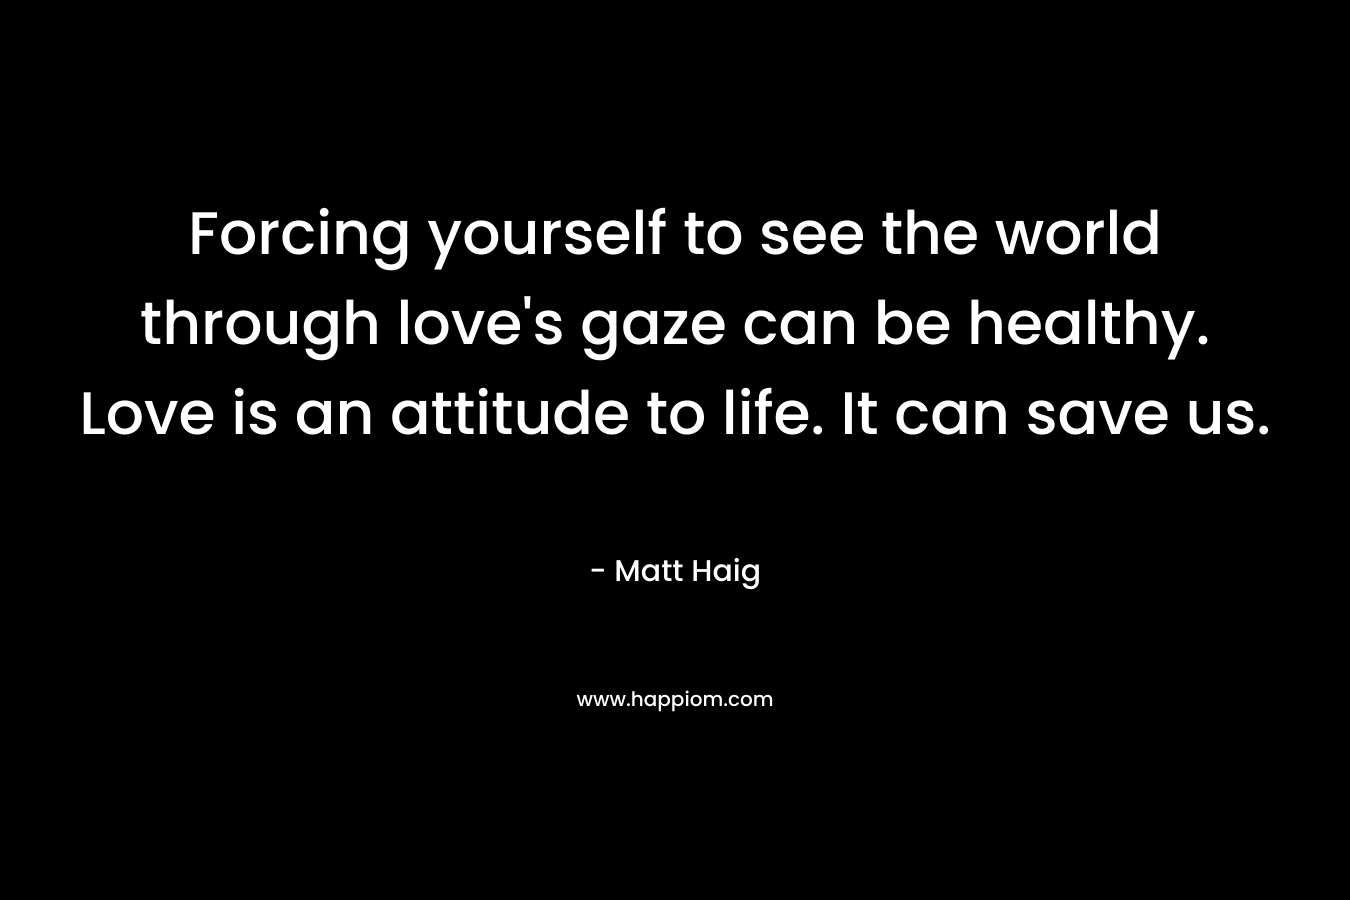 Forcing yourself to see the world through love's gaze can be healthy. Love is an attitude to life. It can save us.